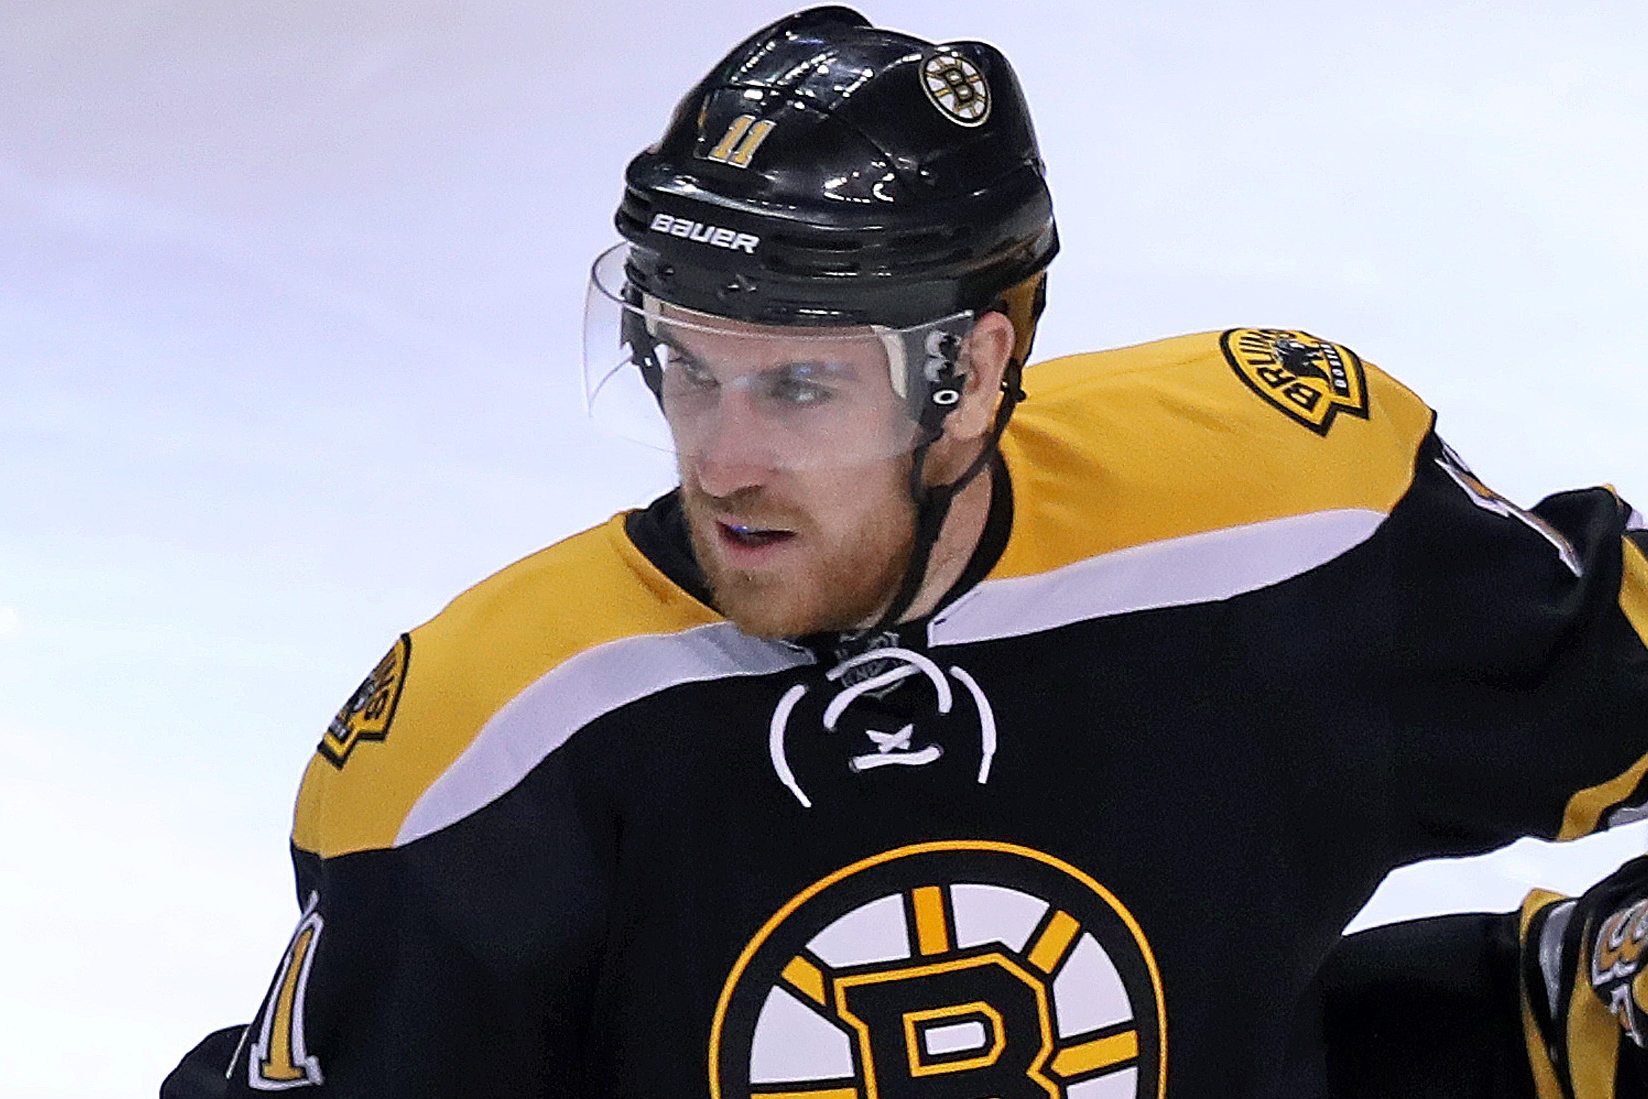 Jimmy Hayes dead at 31: Ex-NHL player passes away unexpectedly